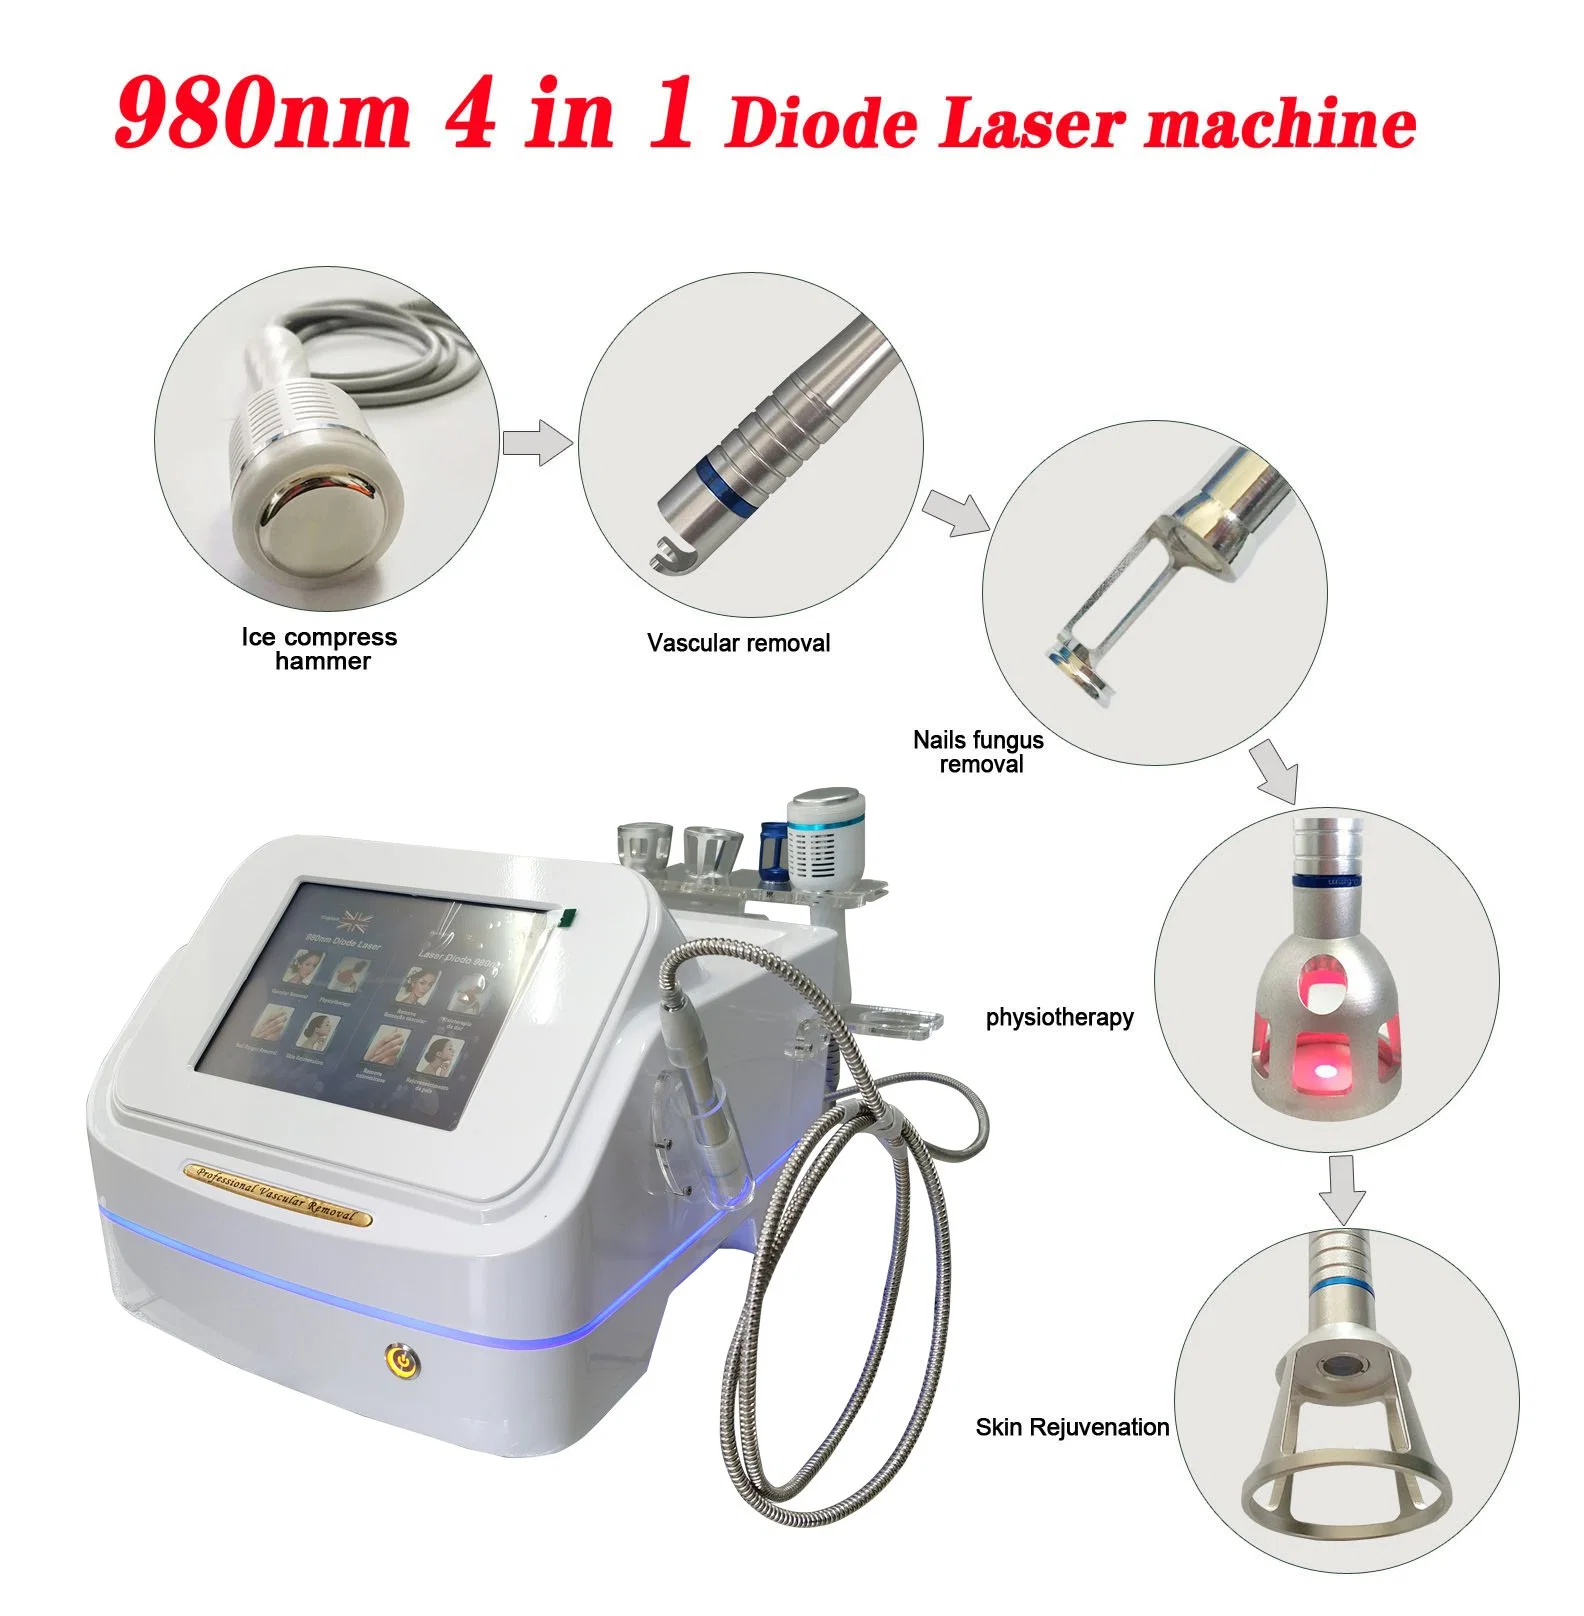 30MHz Rbs High Frequency Portable 980nm Laser Red Vascular Lesion Treatment Blood Vessel Removal Device Machine